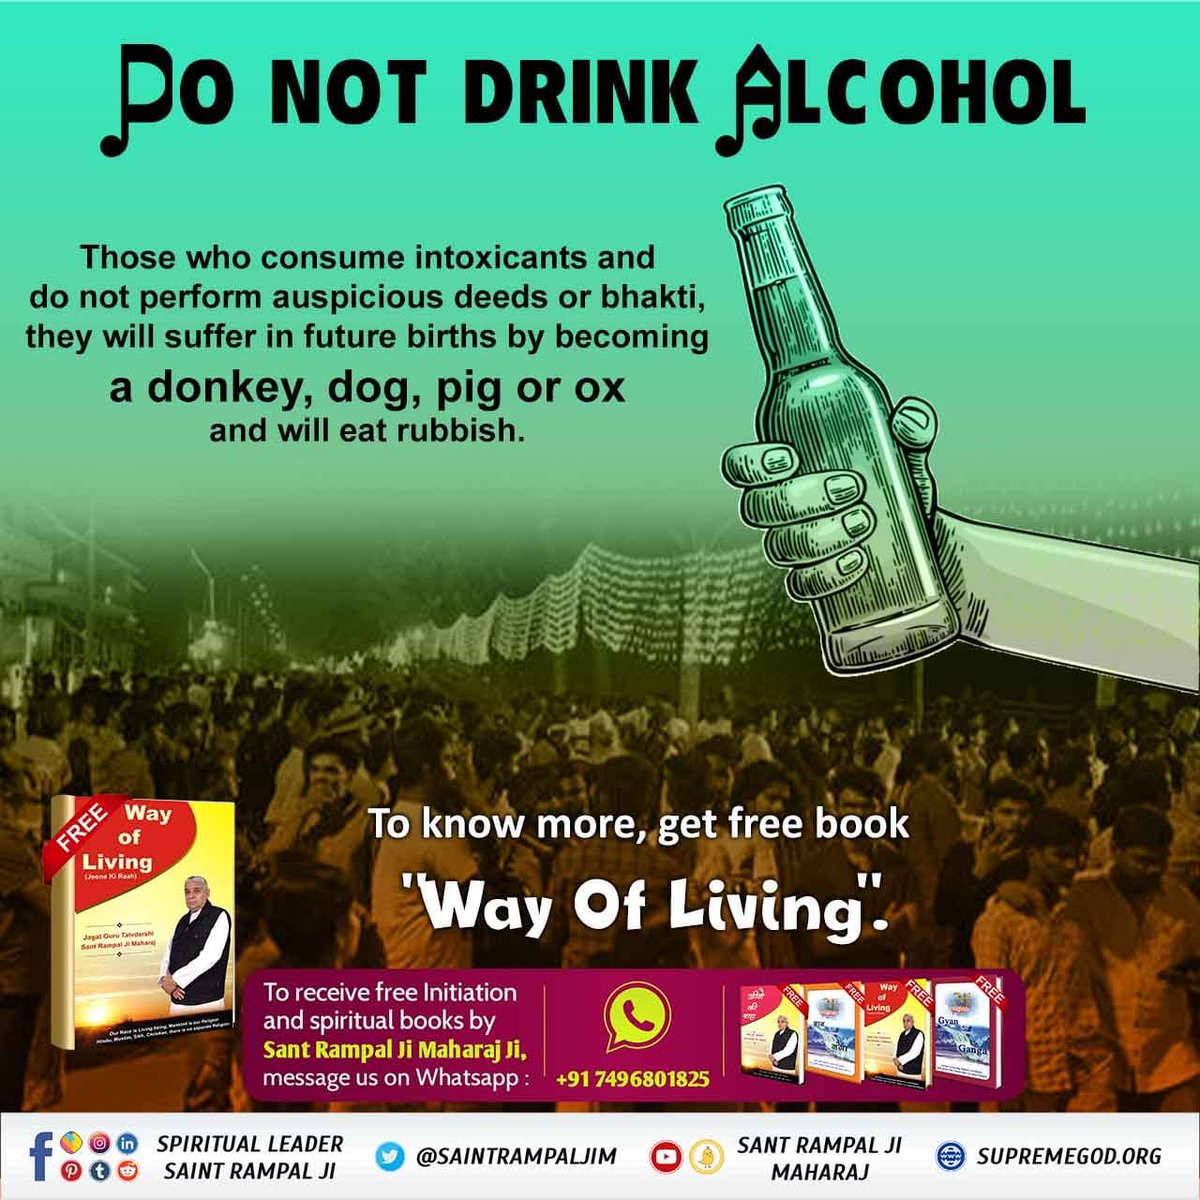 #GodNightMonday
Those who consume intoxicants and do not perform auspicious deeds or bhakti, they will suffer in future births by becoming a donkey, dog, pig or ox and will eat rubbish.